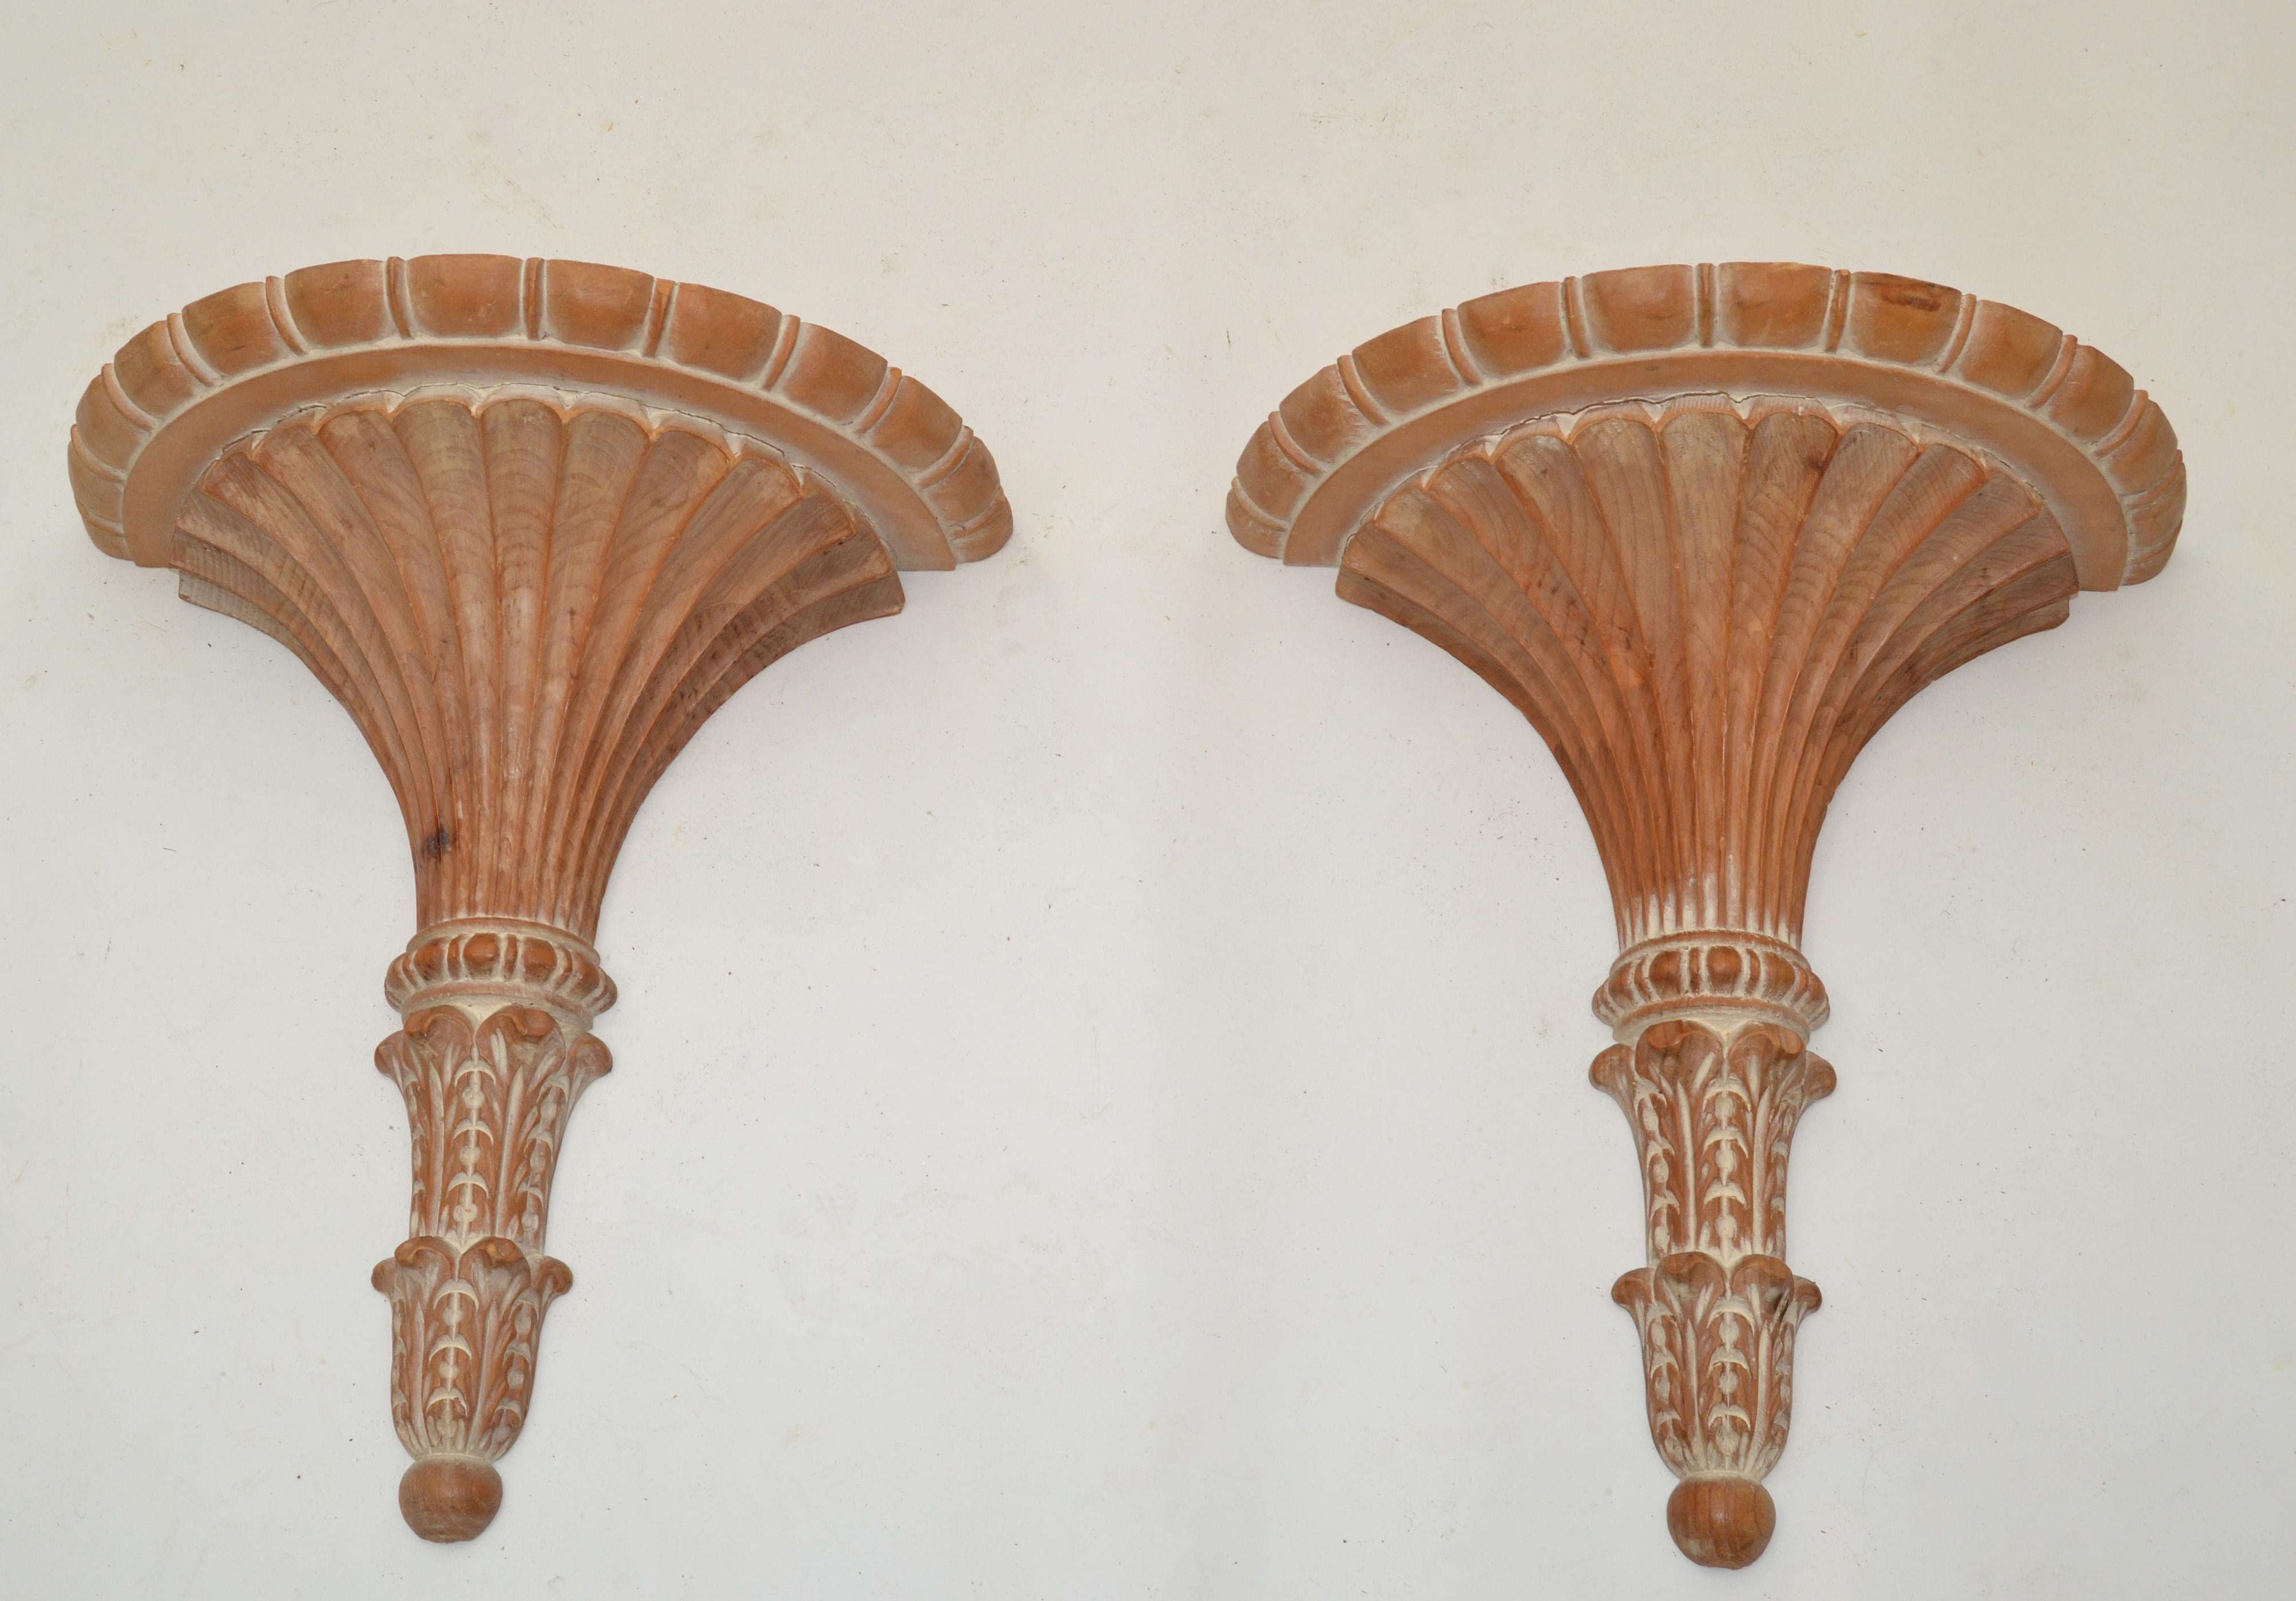 Pair of skillfully hand carved Florentine Neoclassical Beech Wood Wall Shelf Brackets, Console or Wall Sconces made in Italy.
Marked on the Reverse made in Italy.
Note: No Hardware.

